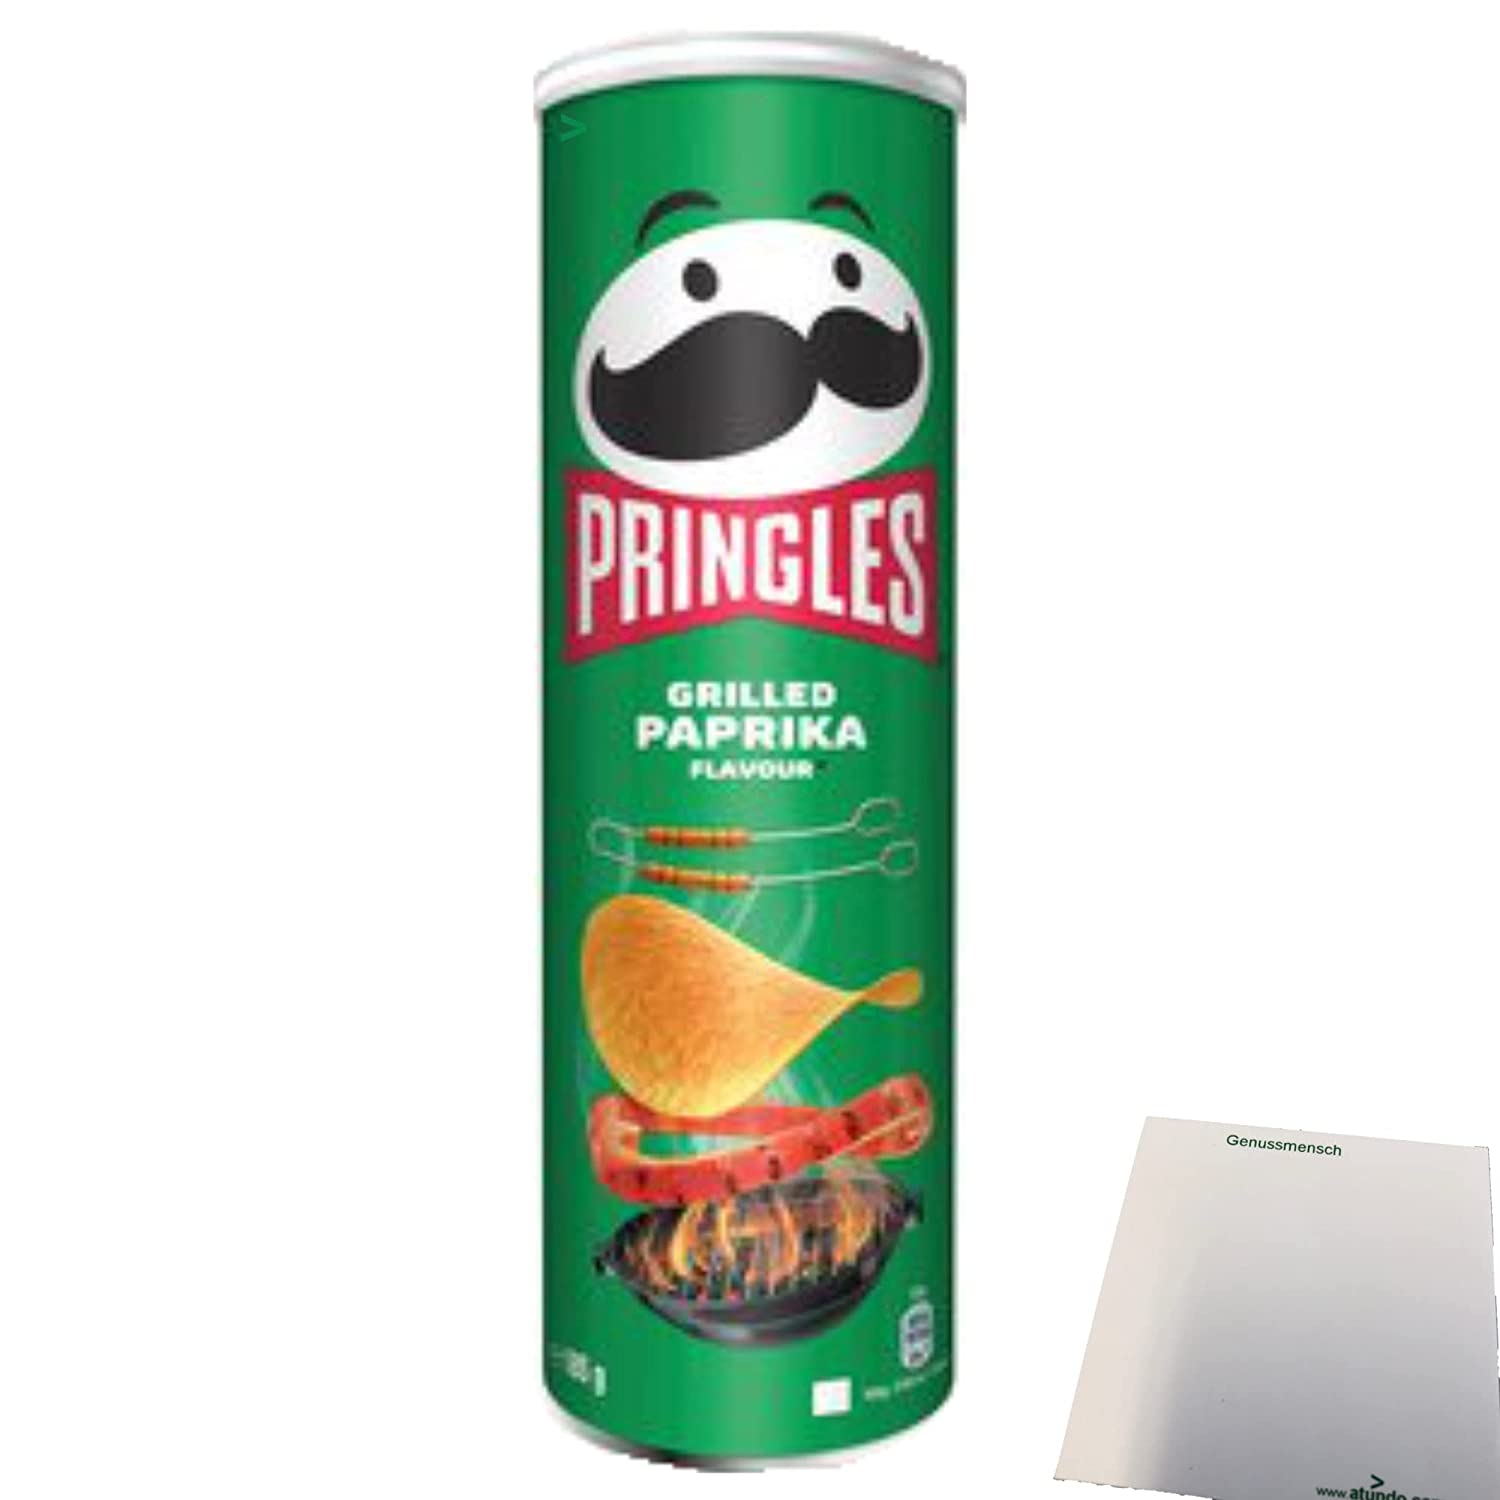 Pringles Grilled Paprika Flavour (185g Packung) + usy Block